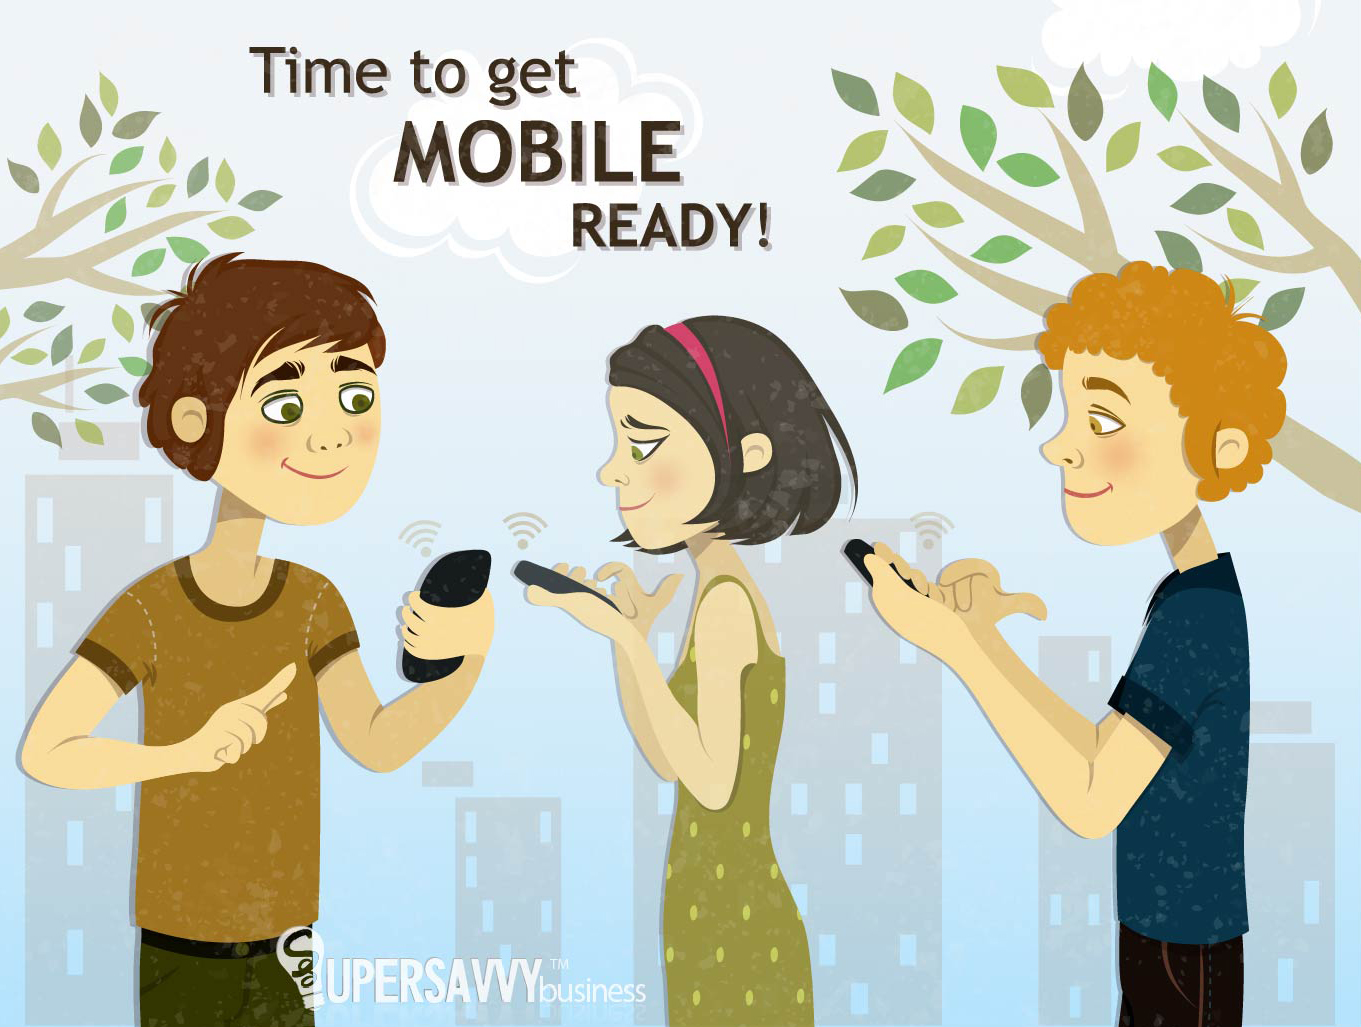 Time to get mobile ready!